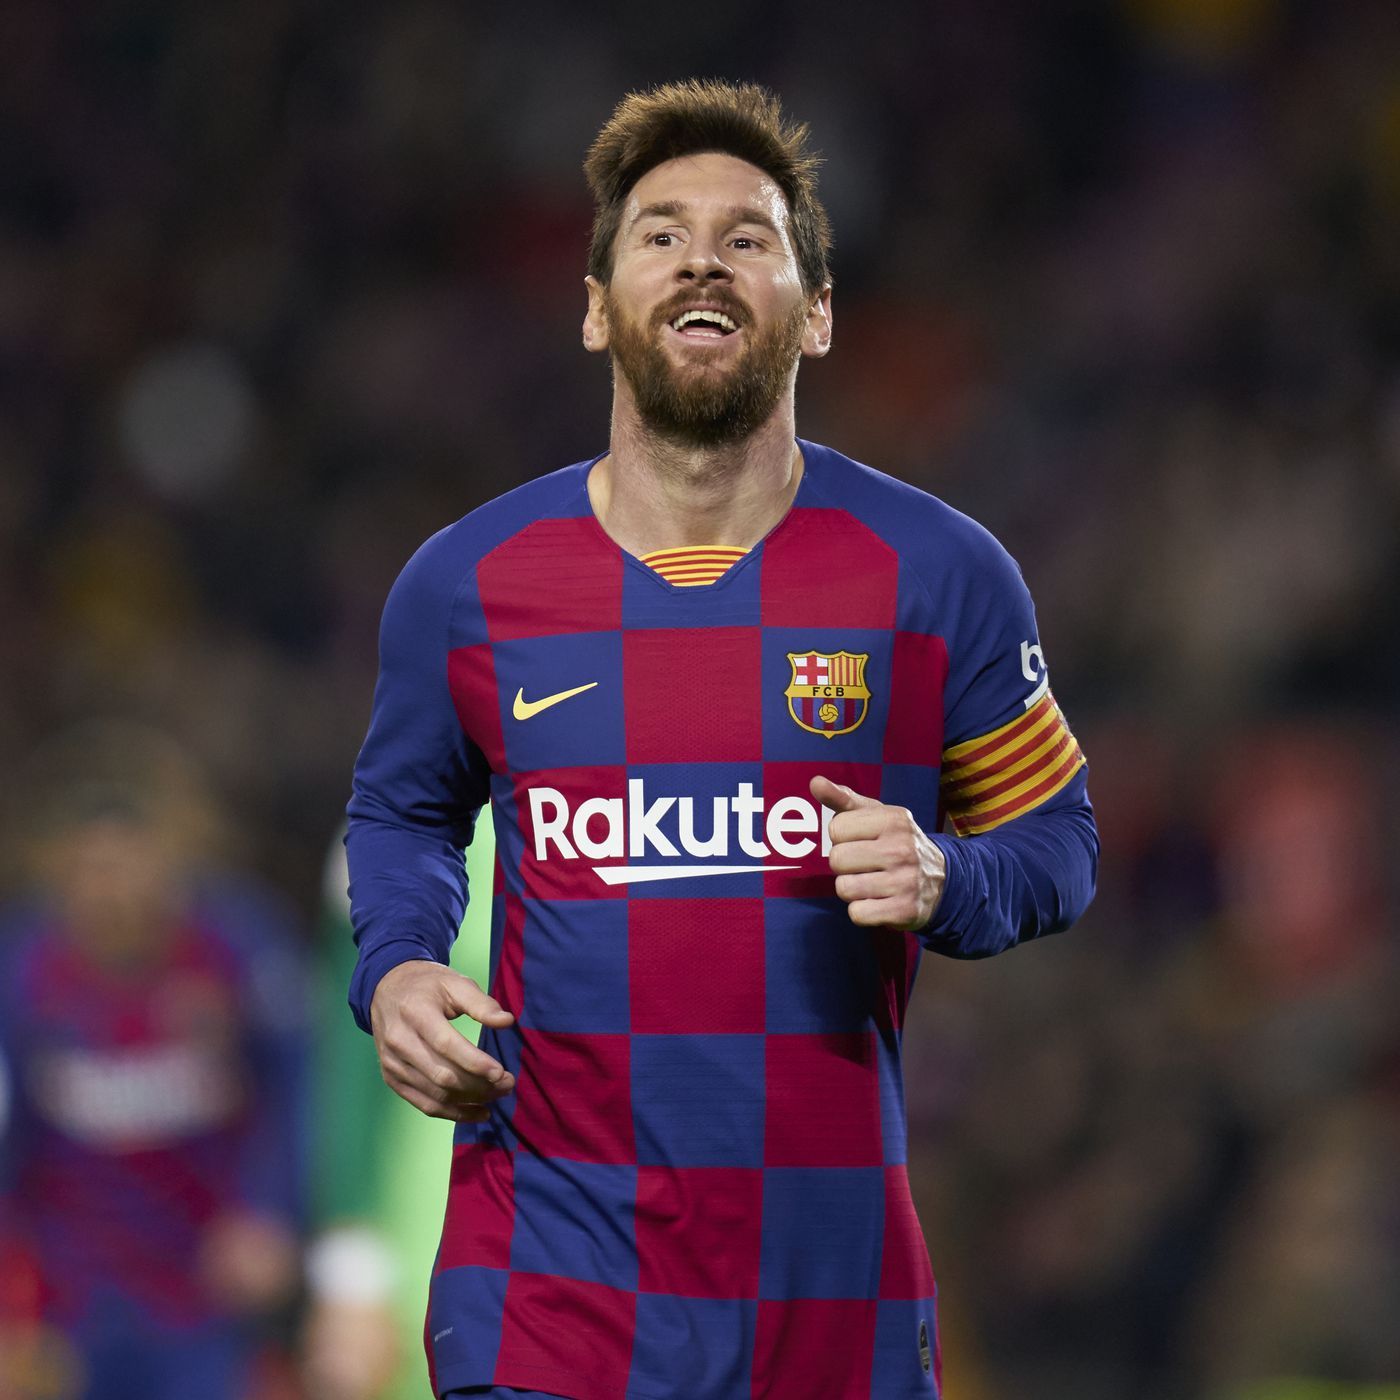 Lionel Messi reaches 500 wins in Barcelona's victory over